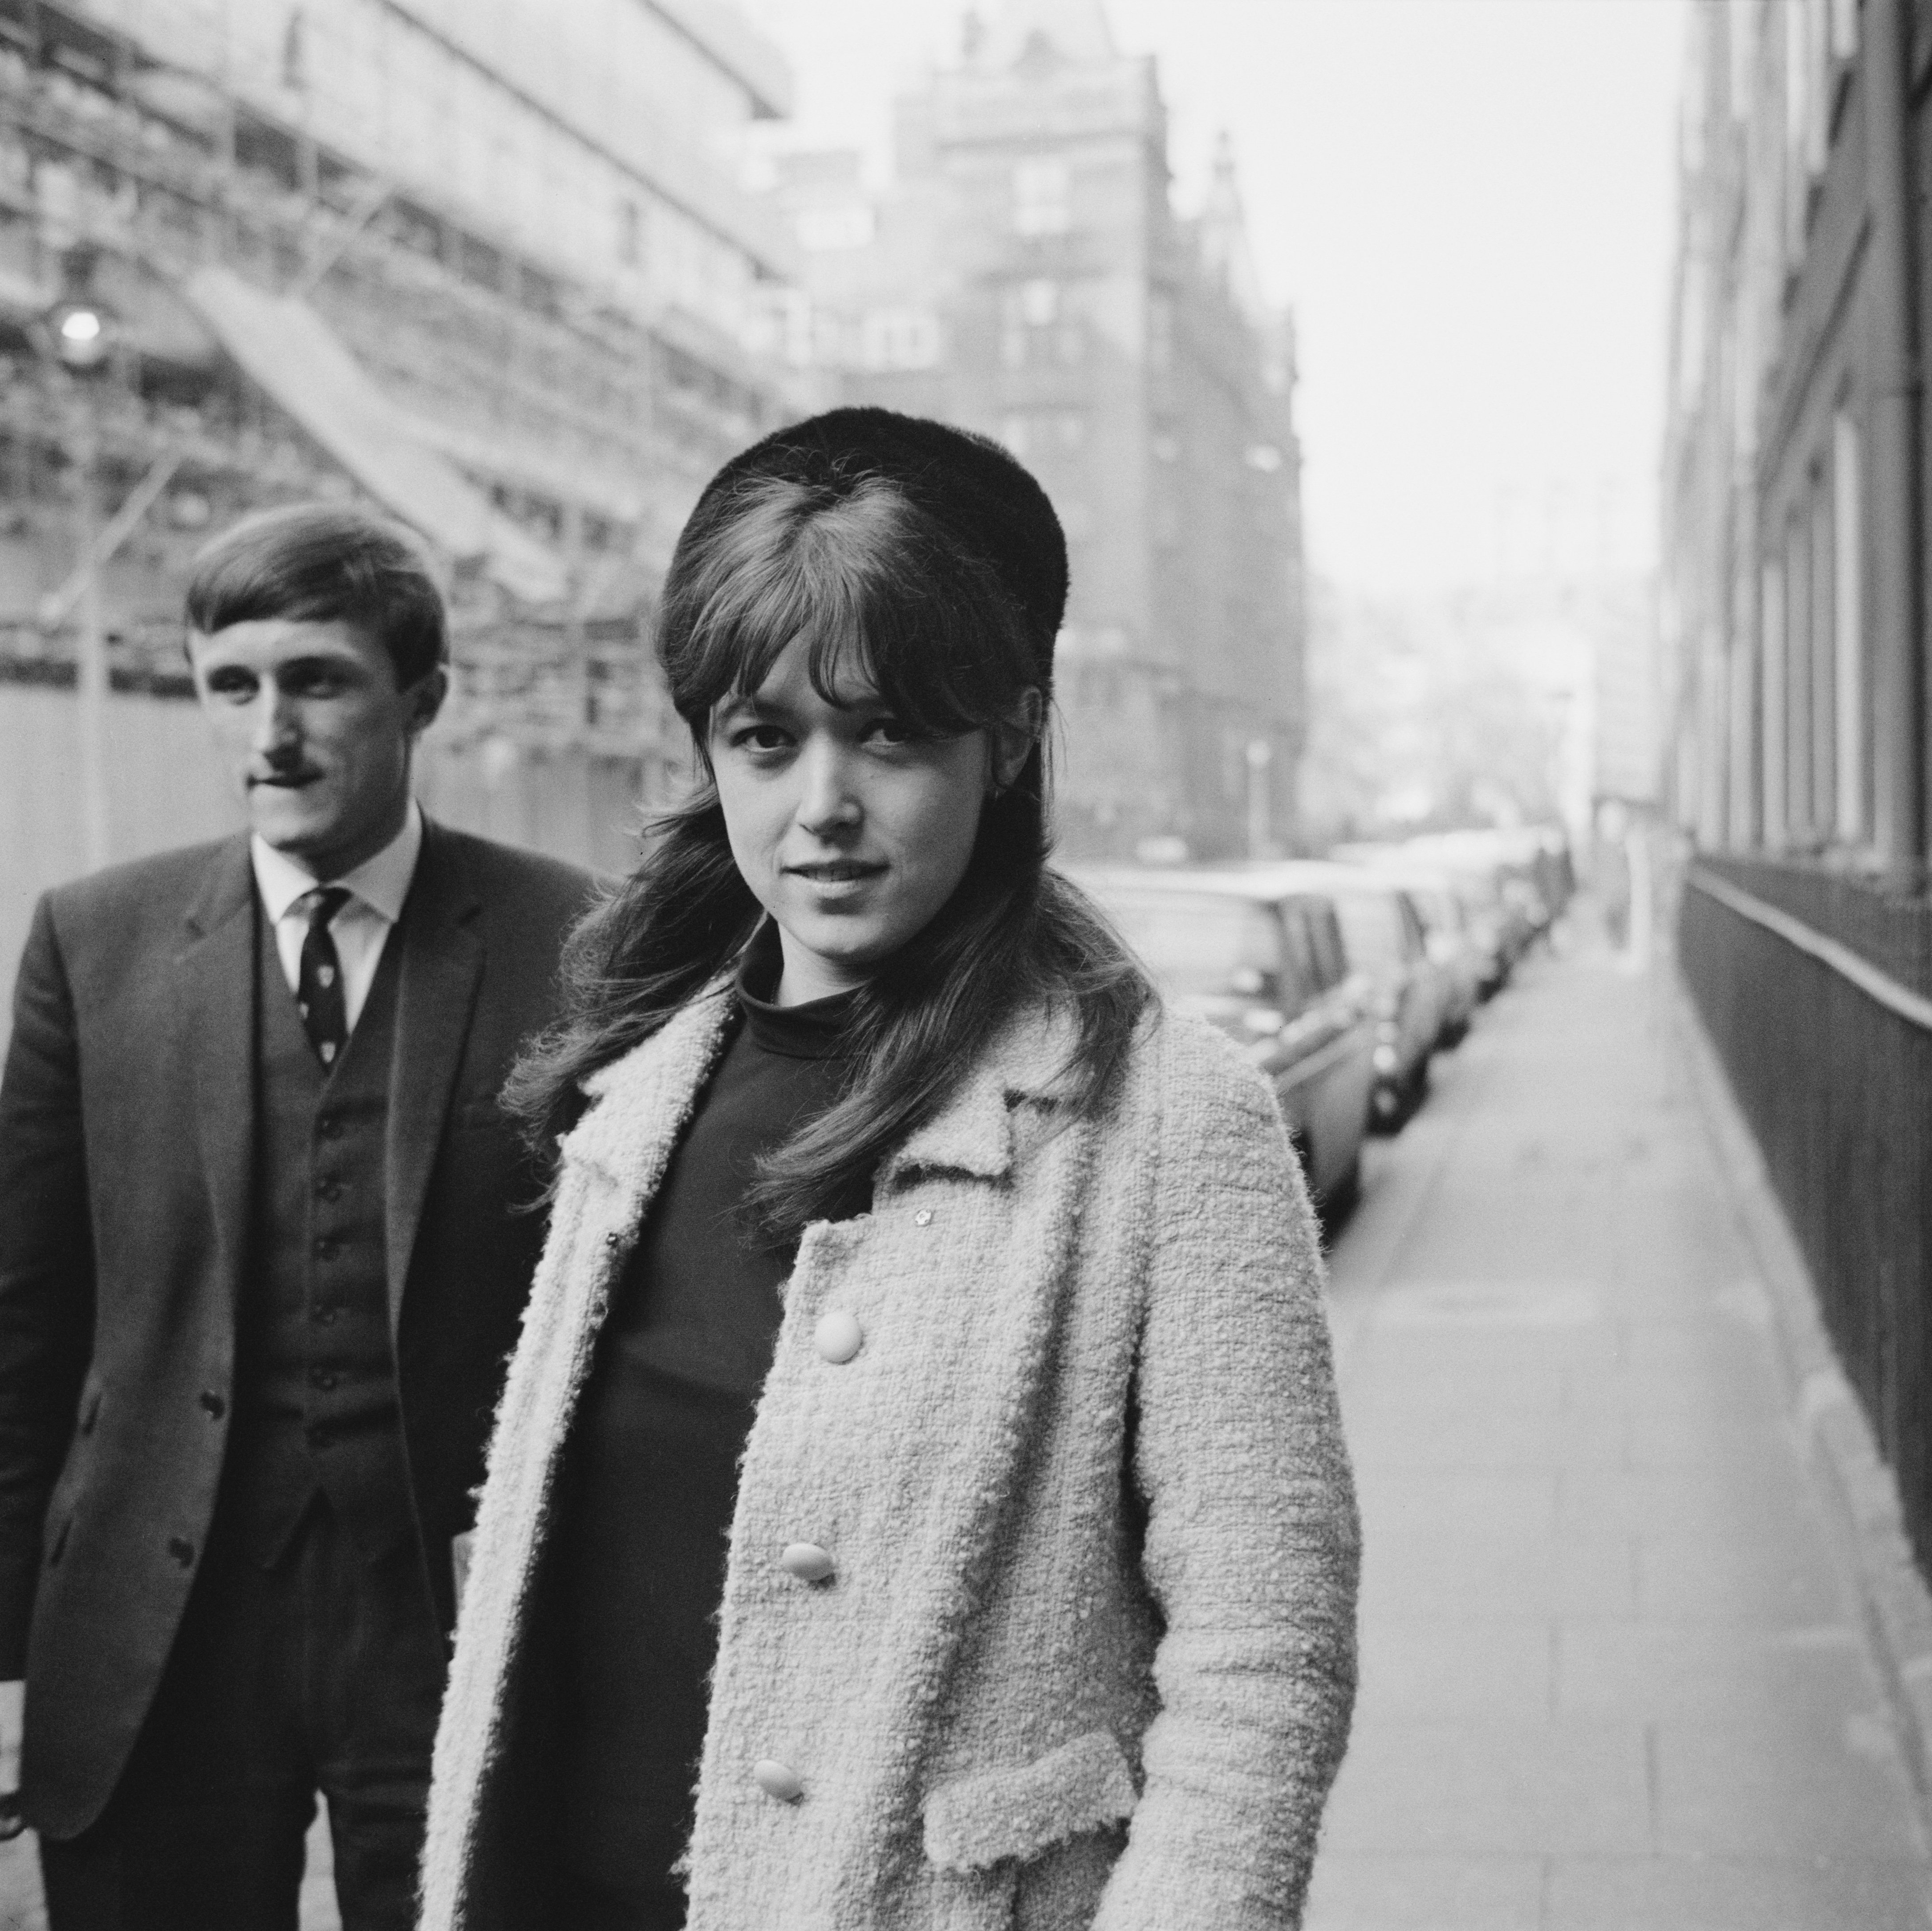 Patricia Brown, former wife of English musician Jeff Beck, is pictured after she was granted a divorce from him on November 16, 1967, in London, England | Source: Getty Images